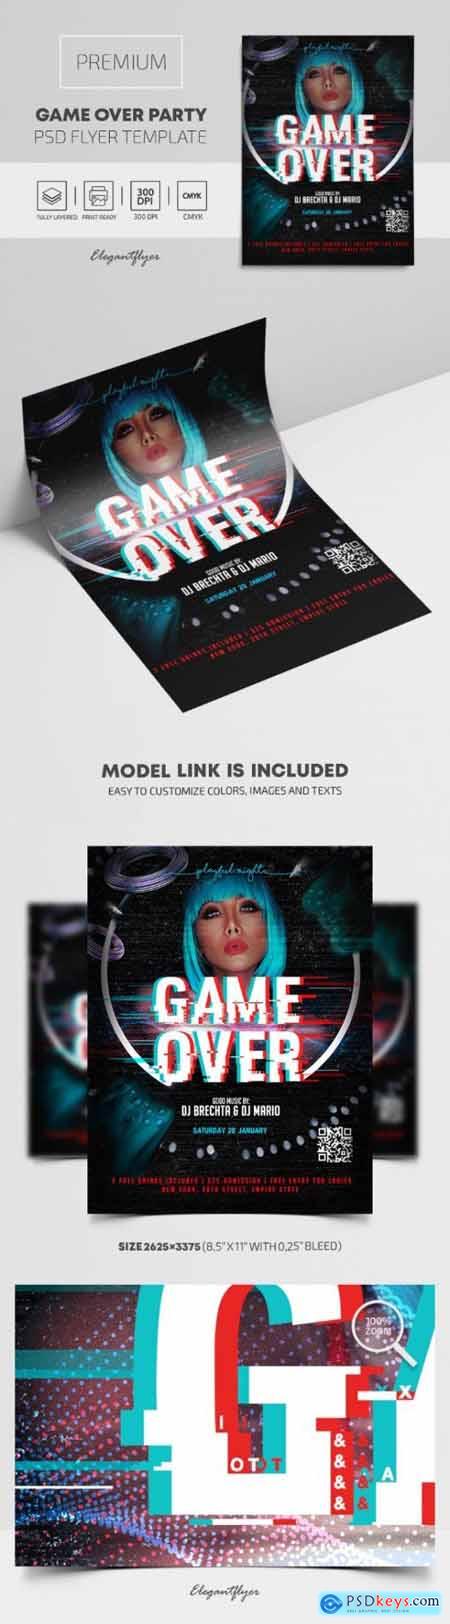 Game Over Party – Premium PSD Flyer Template